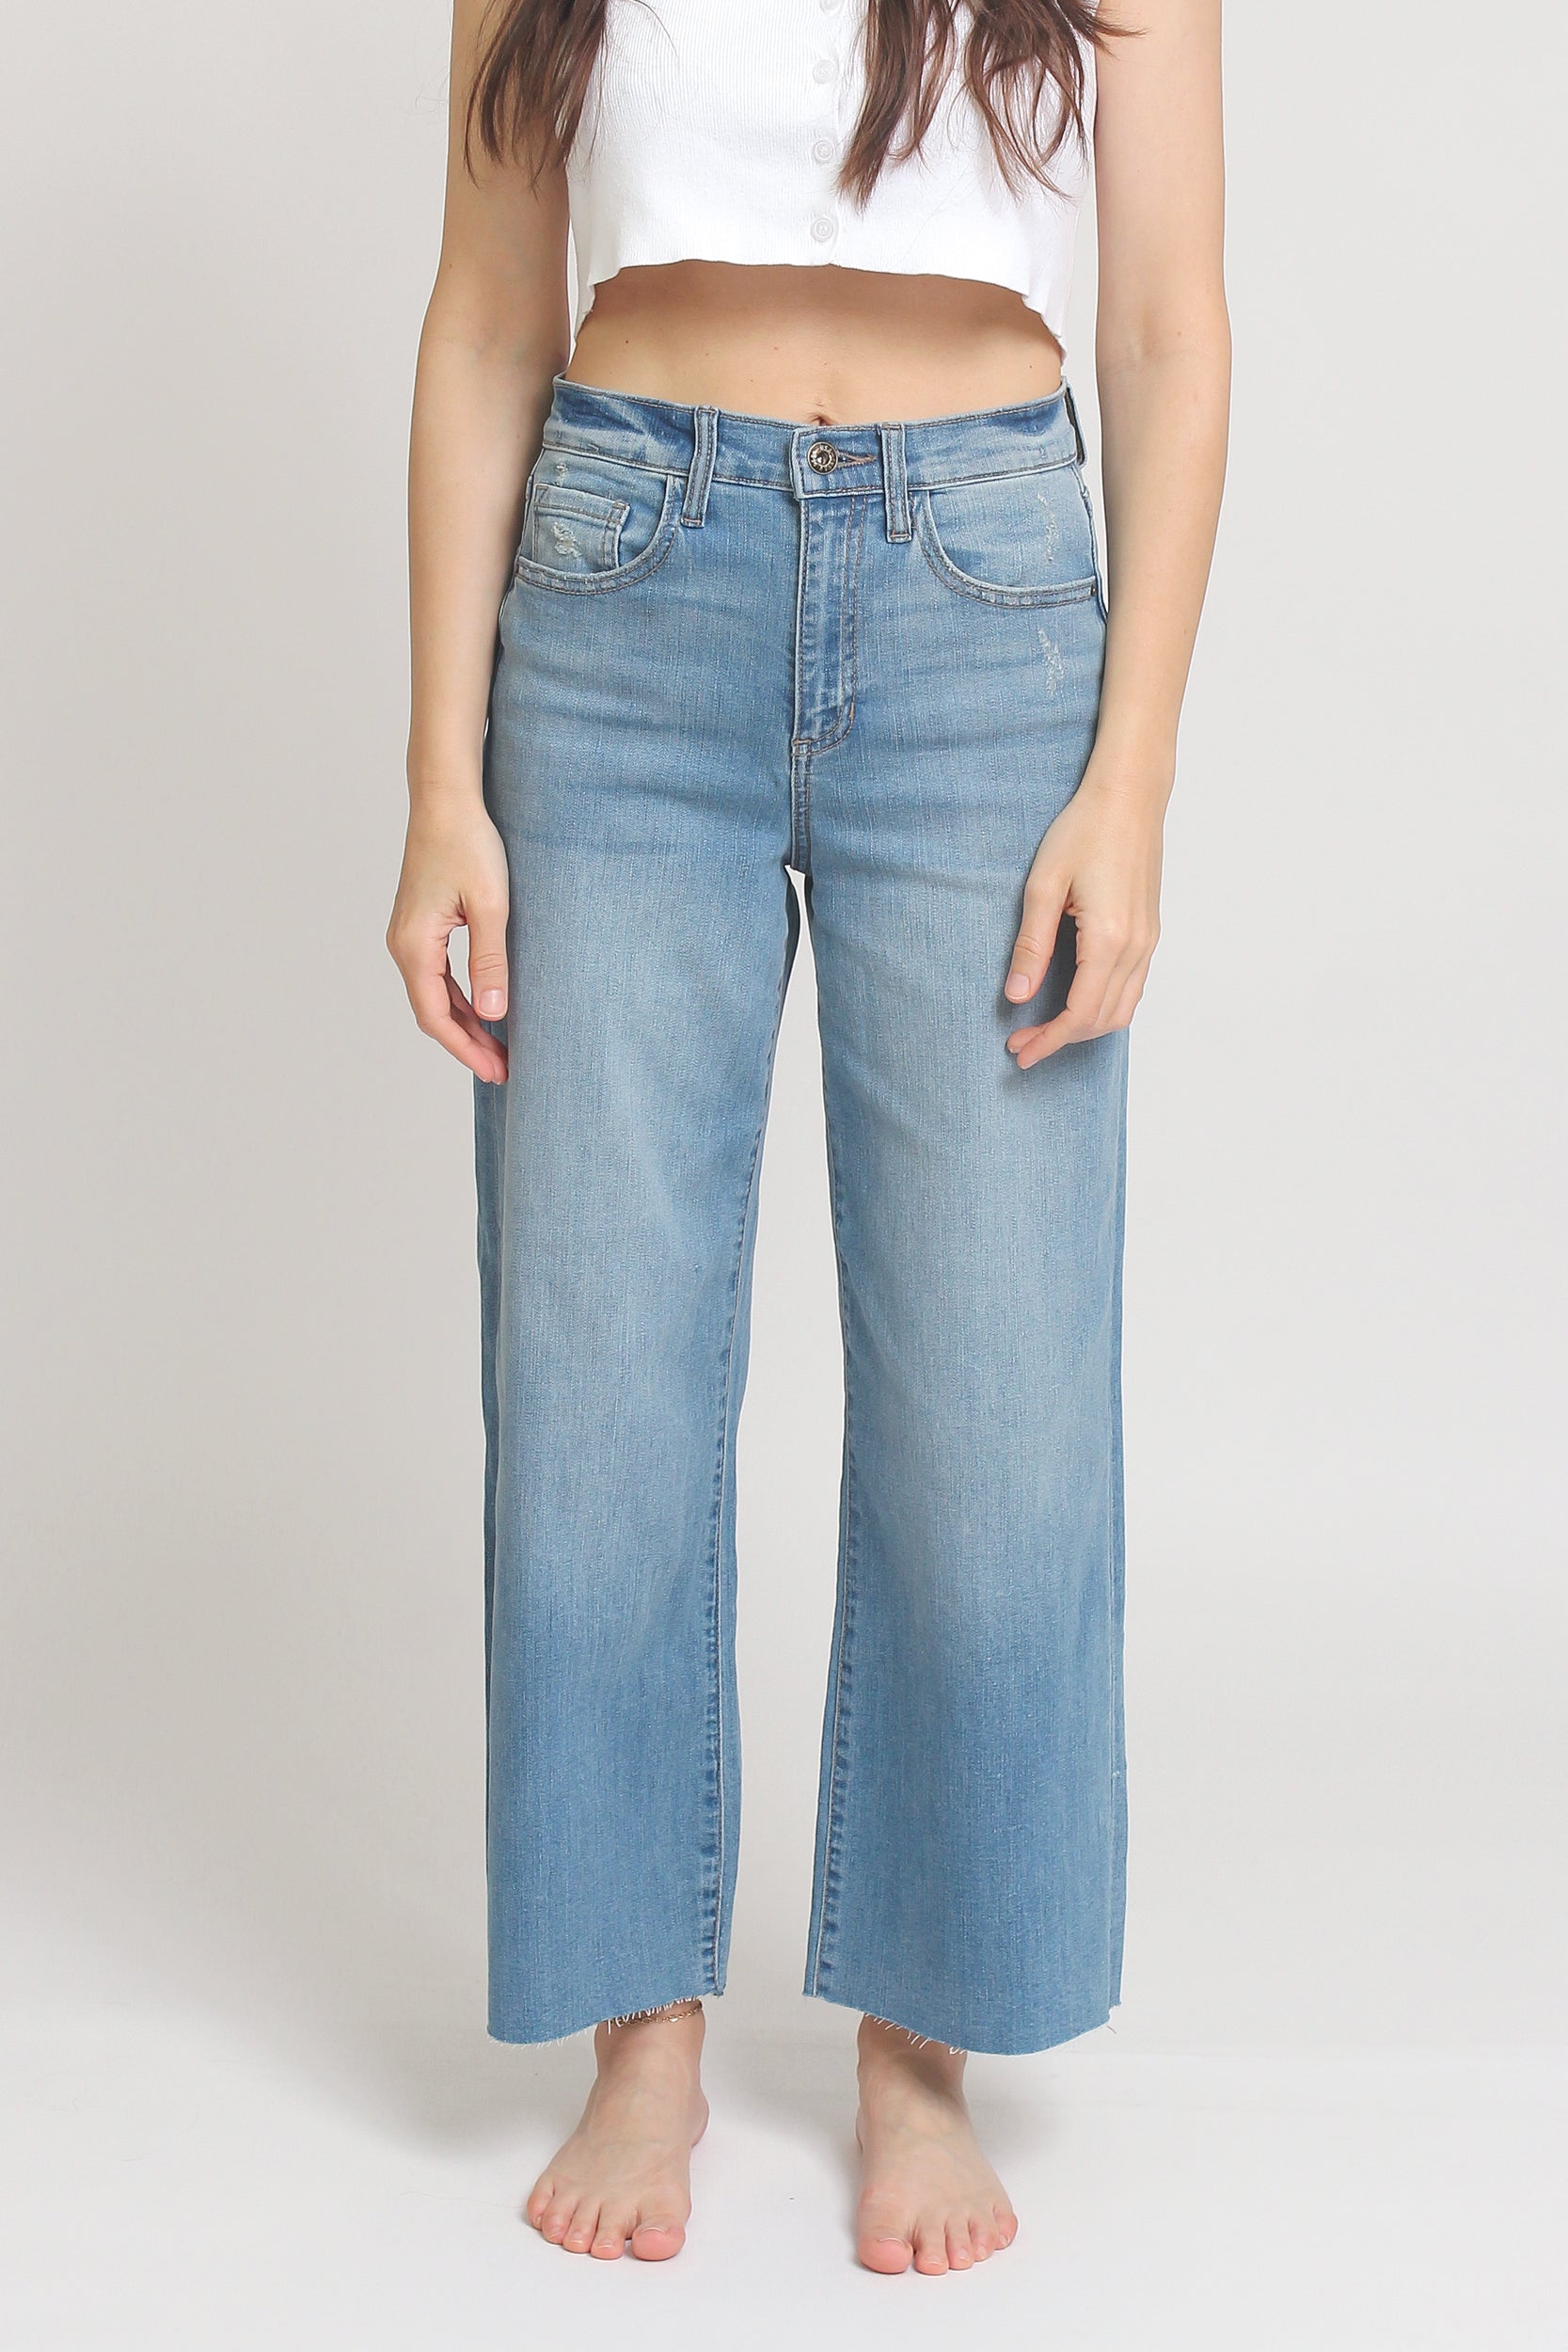 High waist, cut off cropped jeans, in Med/Light. Image 8